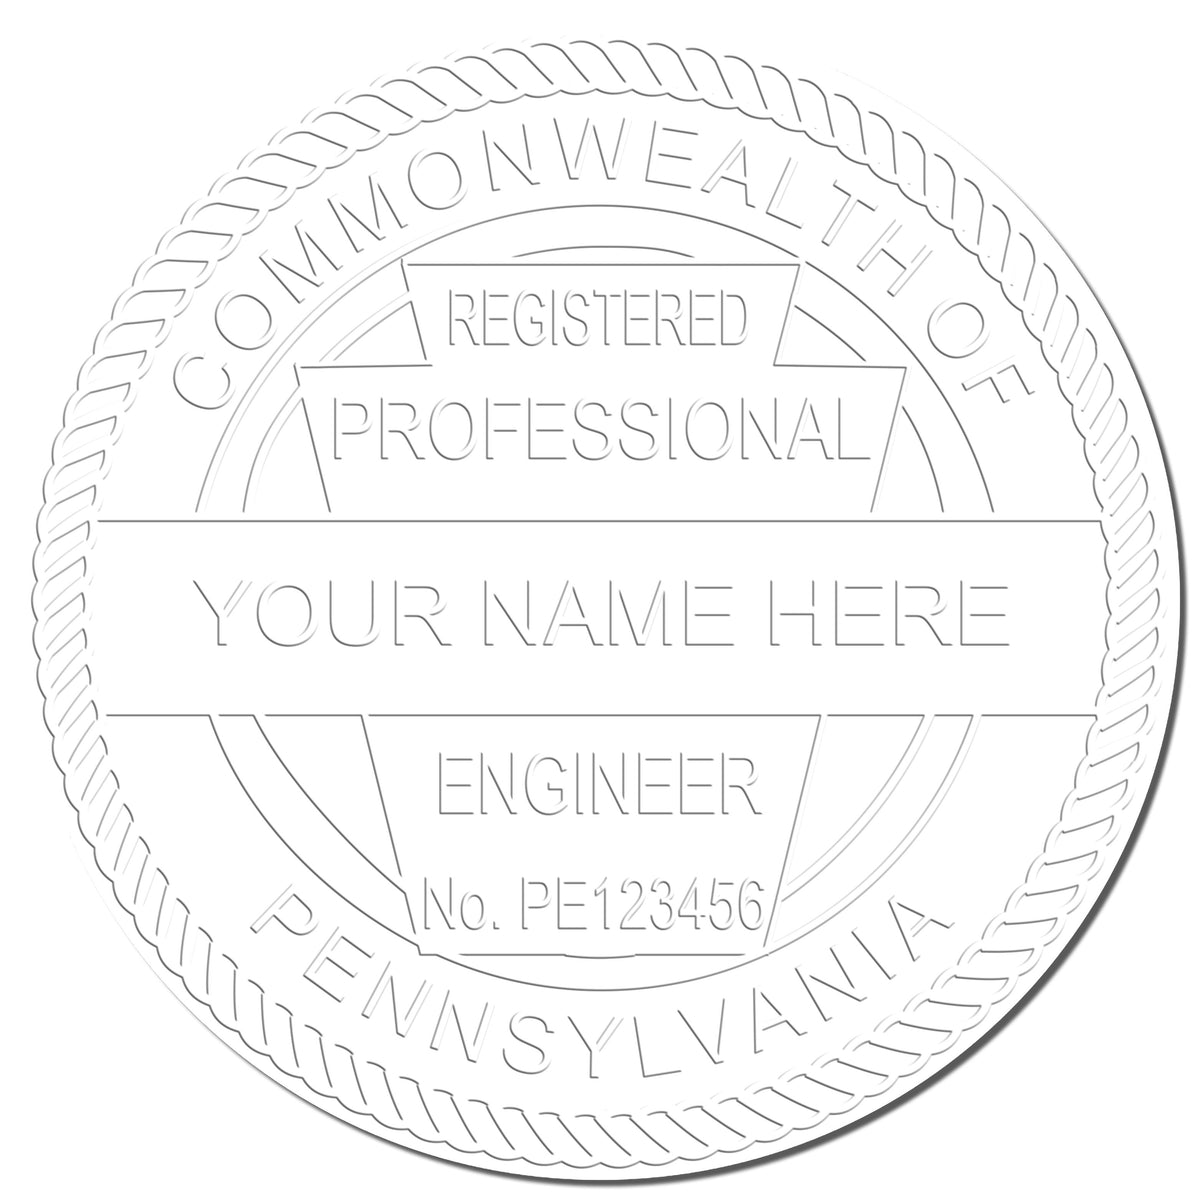 The Soft Pennsylvania Professional Engineer Seal stamp impression comes to life with a crisp, detailed photo on paper - showcasing true professional quality.